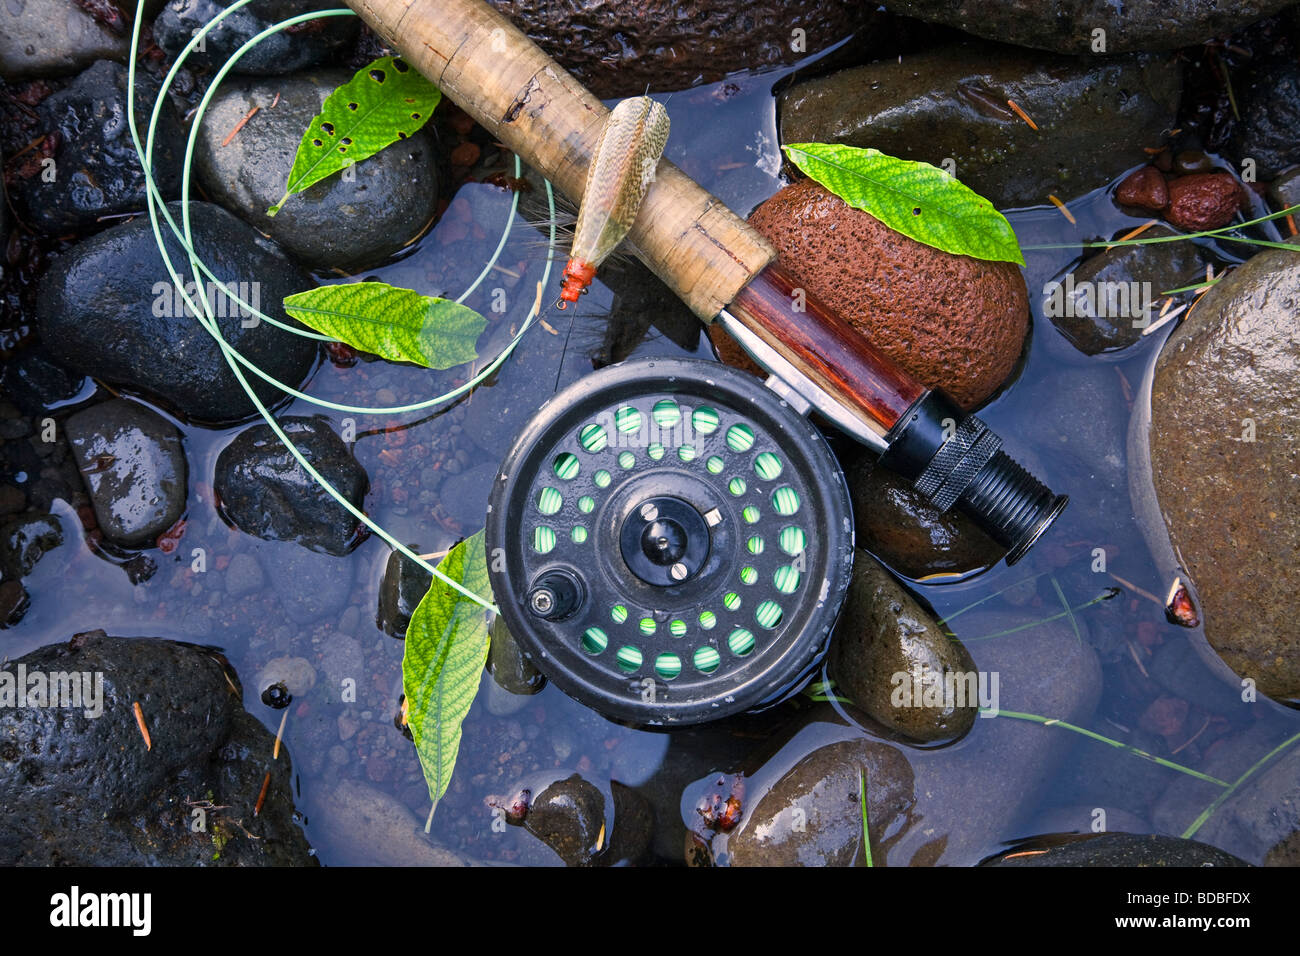 https://c8.alamy.com/comp/BDBFDX/a-fly-rod-fly-reel-trout-fishing-net-and-box-of-artificial-flies-used-BDBFDX.jpg